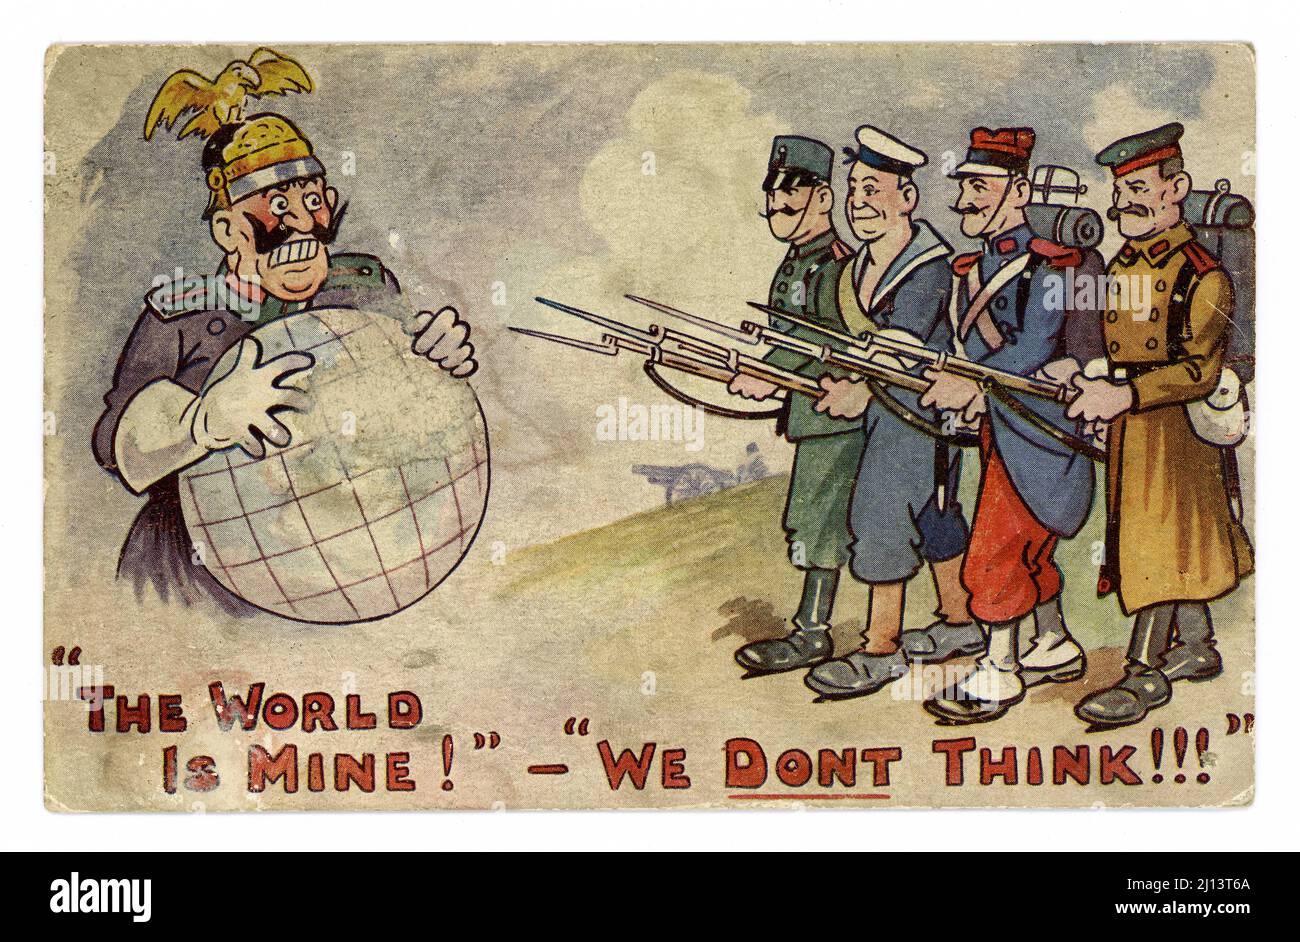 Original WW1 era satirical comic cartoon postcard - Kaiser Wilhelm II (last German emperor and King of Prussia) of the German Empire states 'The World is Mine!', with the principal allies against Germany - Italy, Britain, France and Russia standing firm with fixed bayonets, responding with 'we don't think!!!'. Circa 1915, U.K. Stock Photo